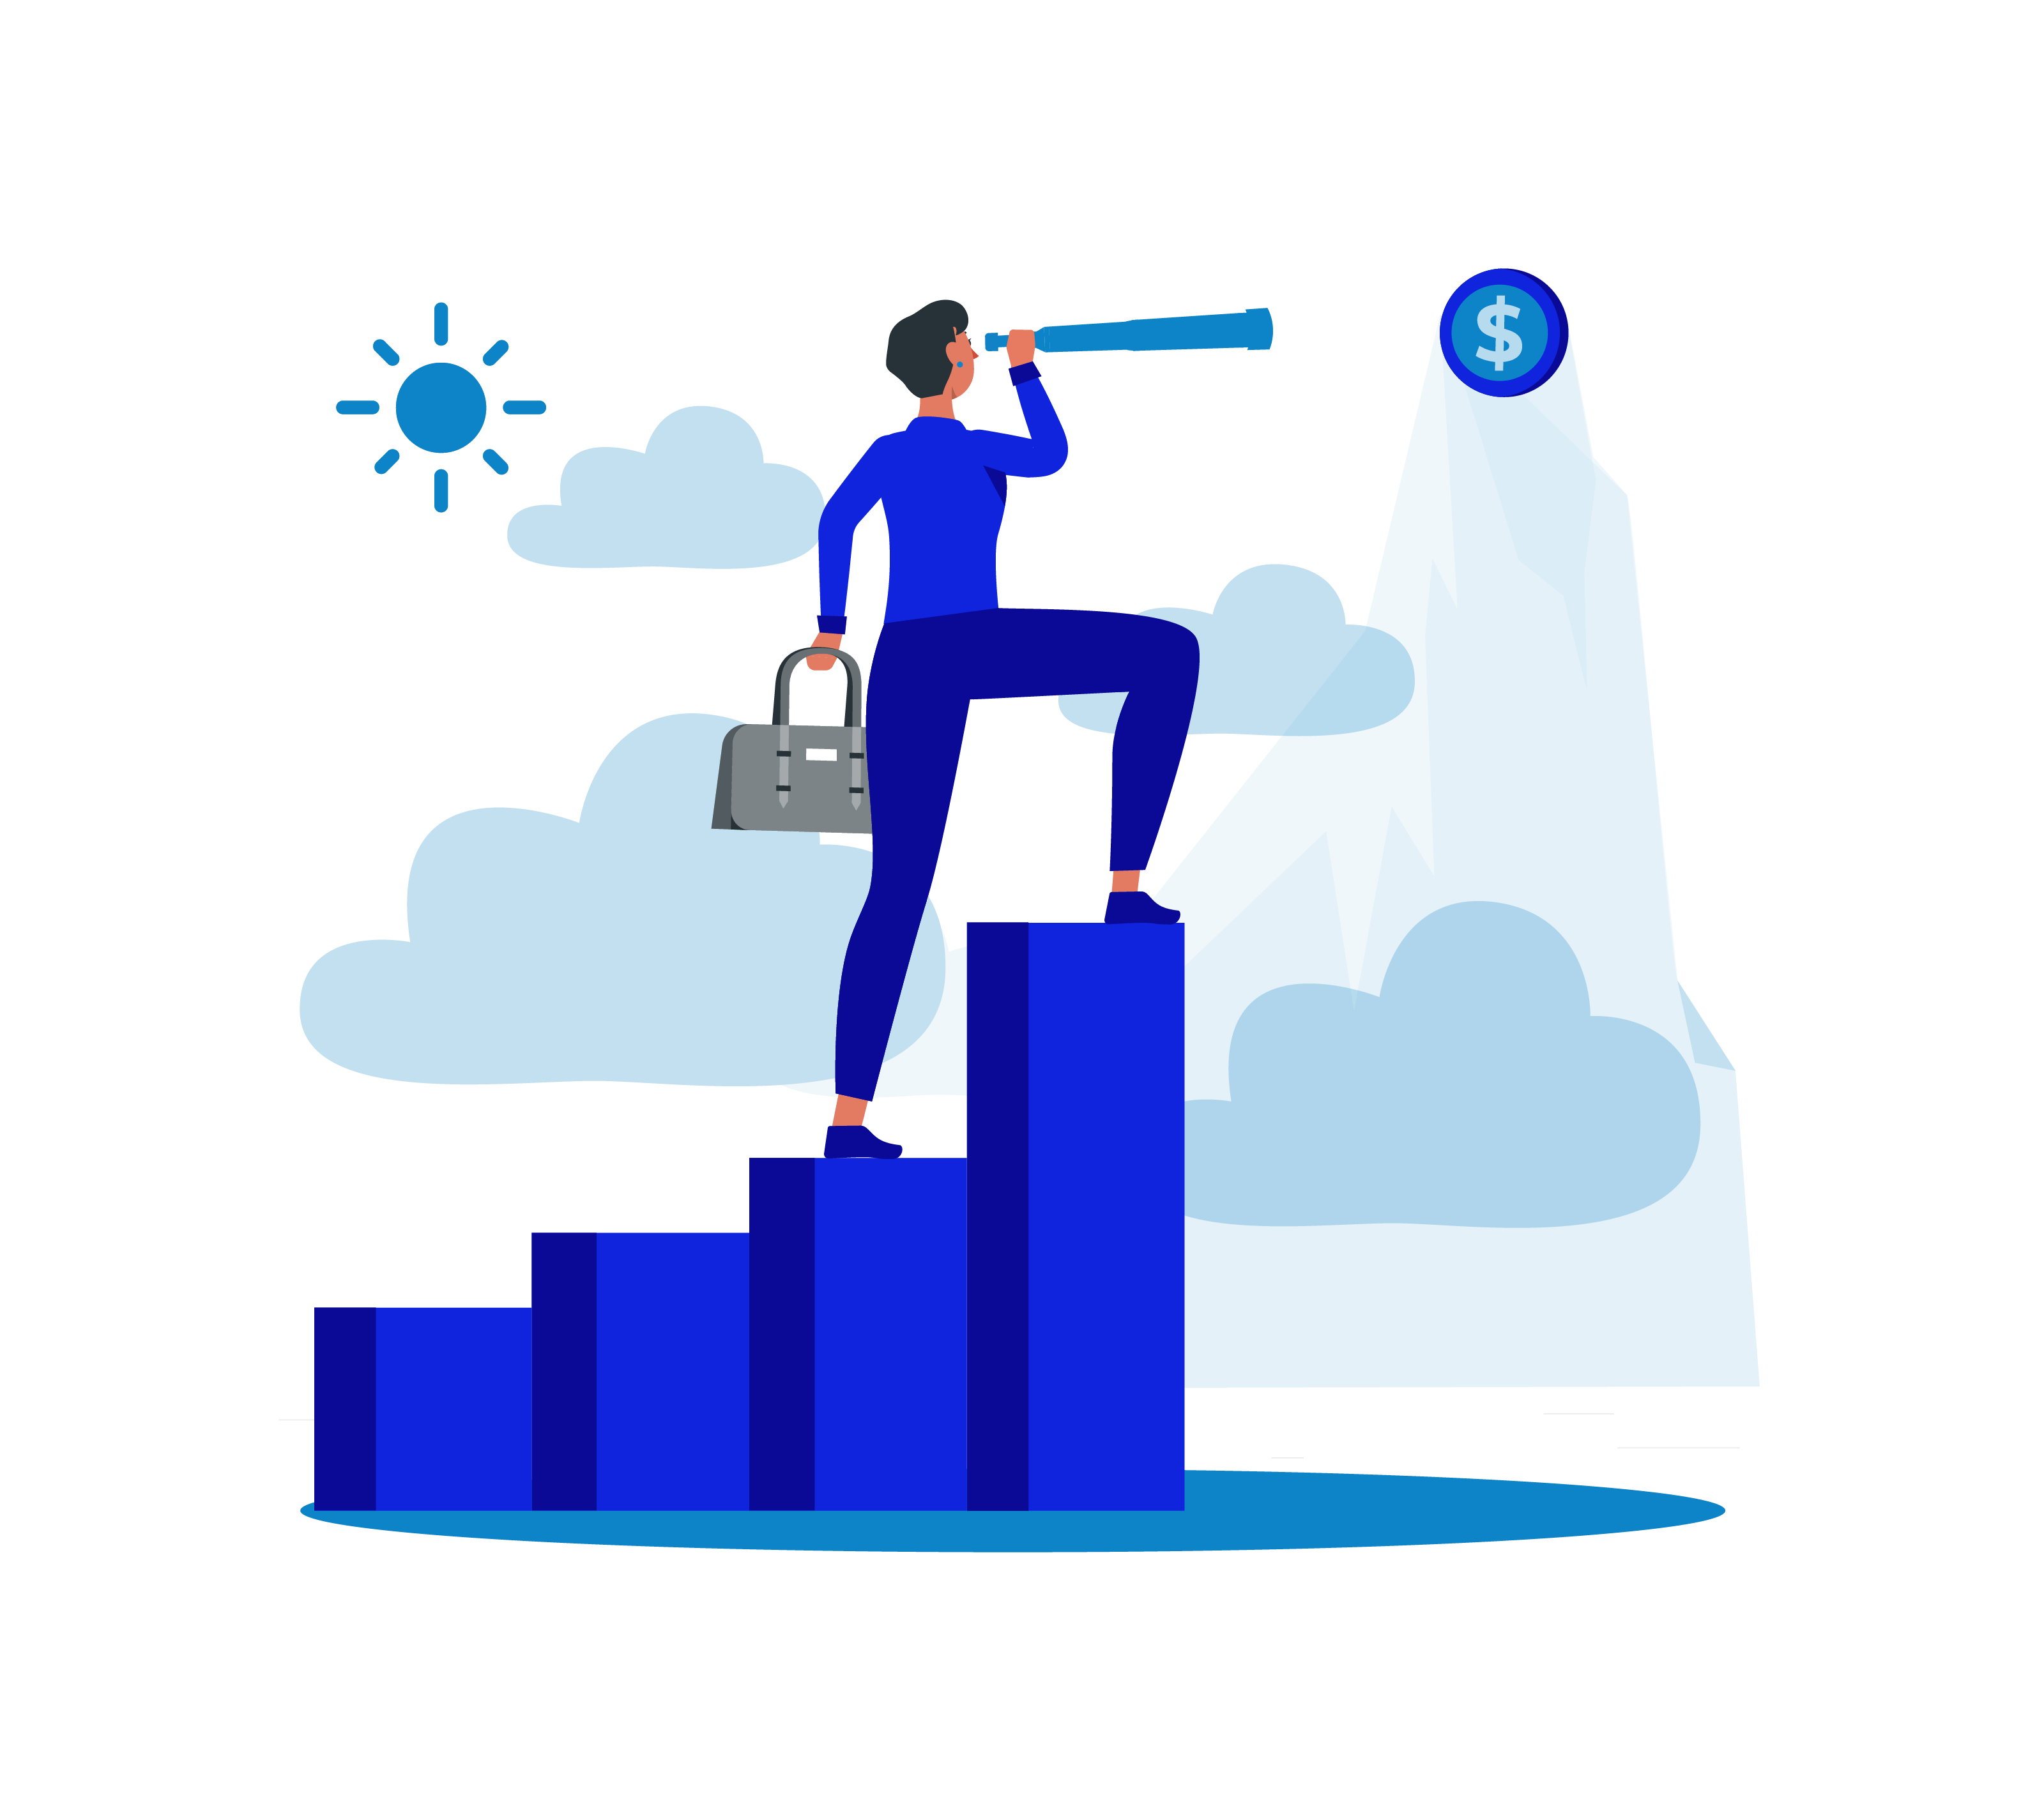 Illustration of person climbing up to success